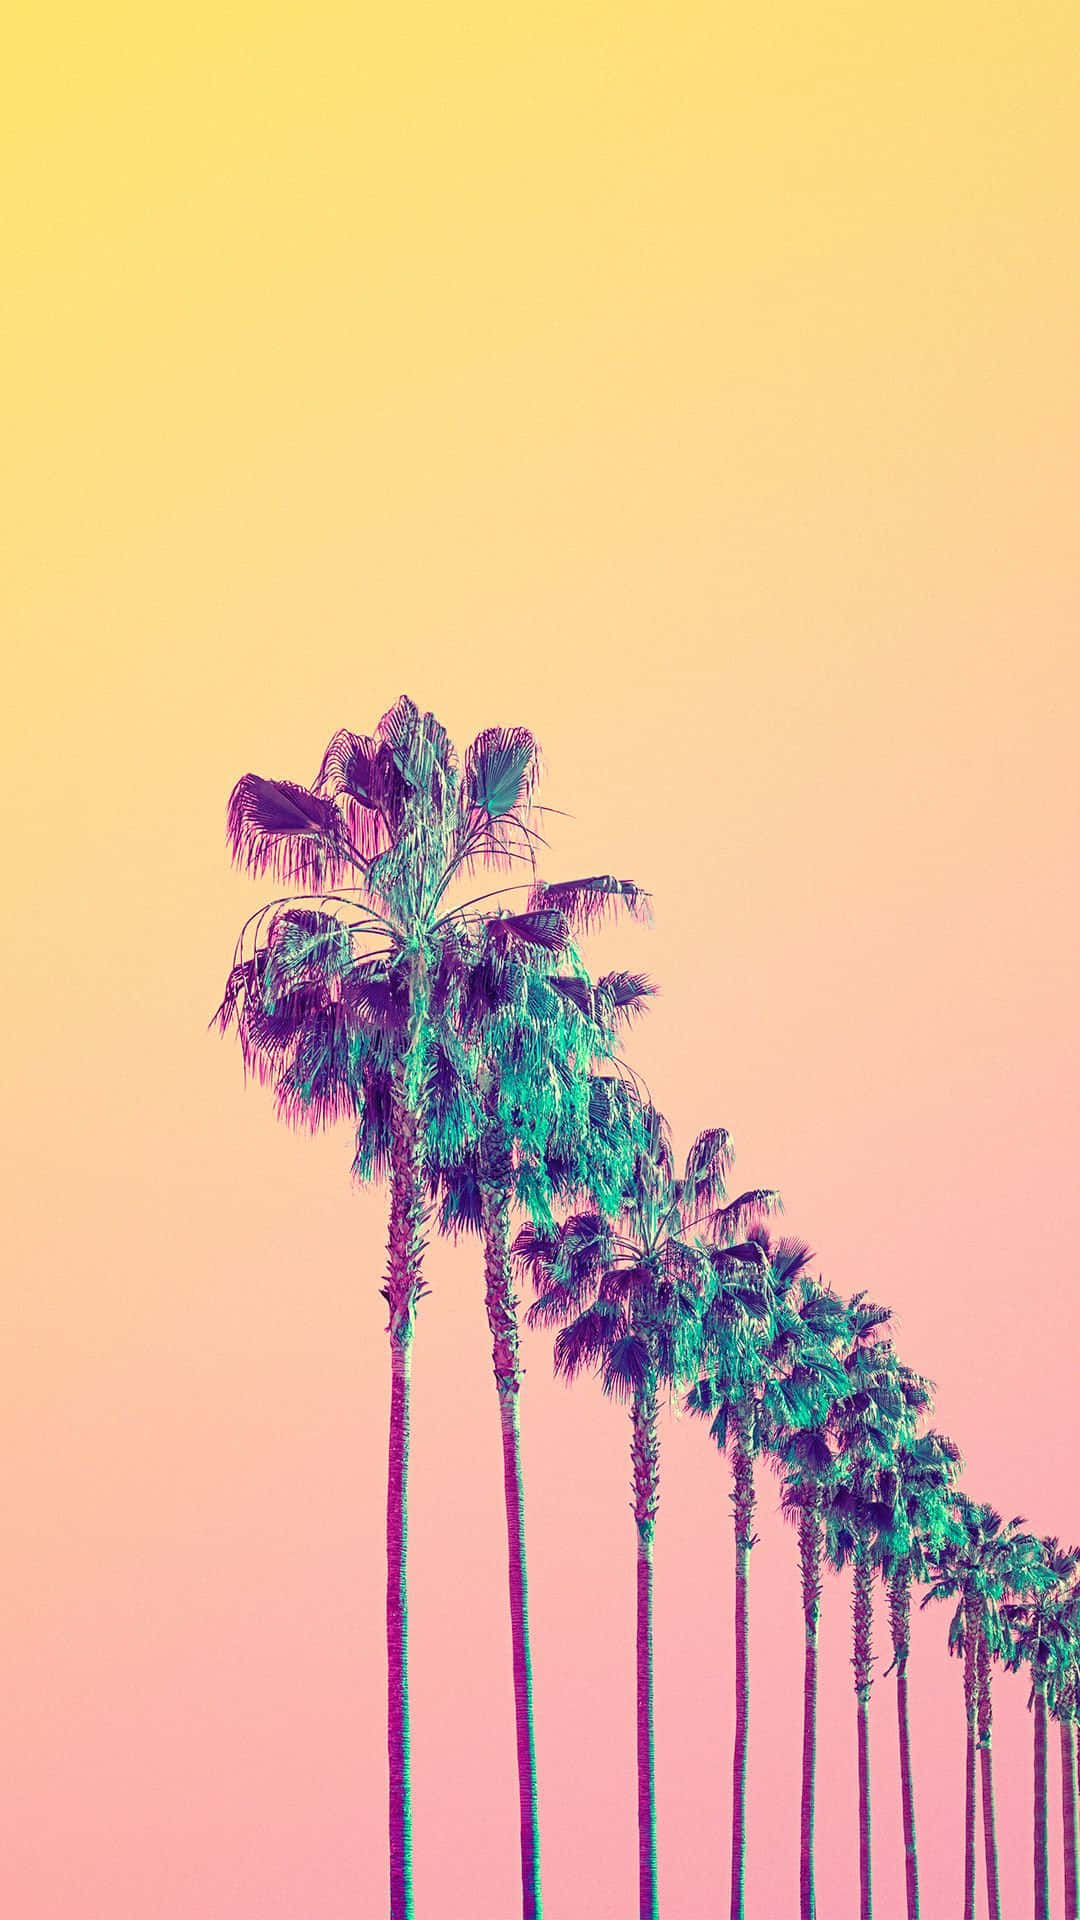 Aesthetic Summer California Palm Picture